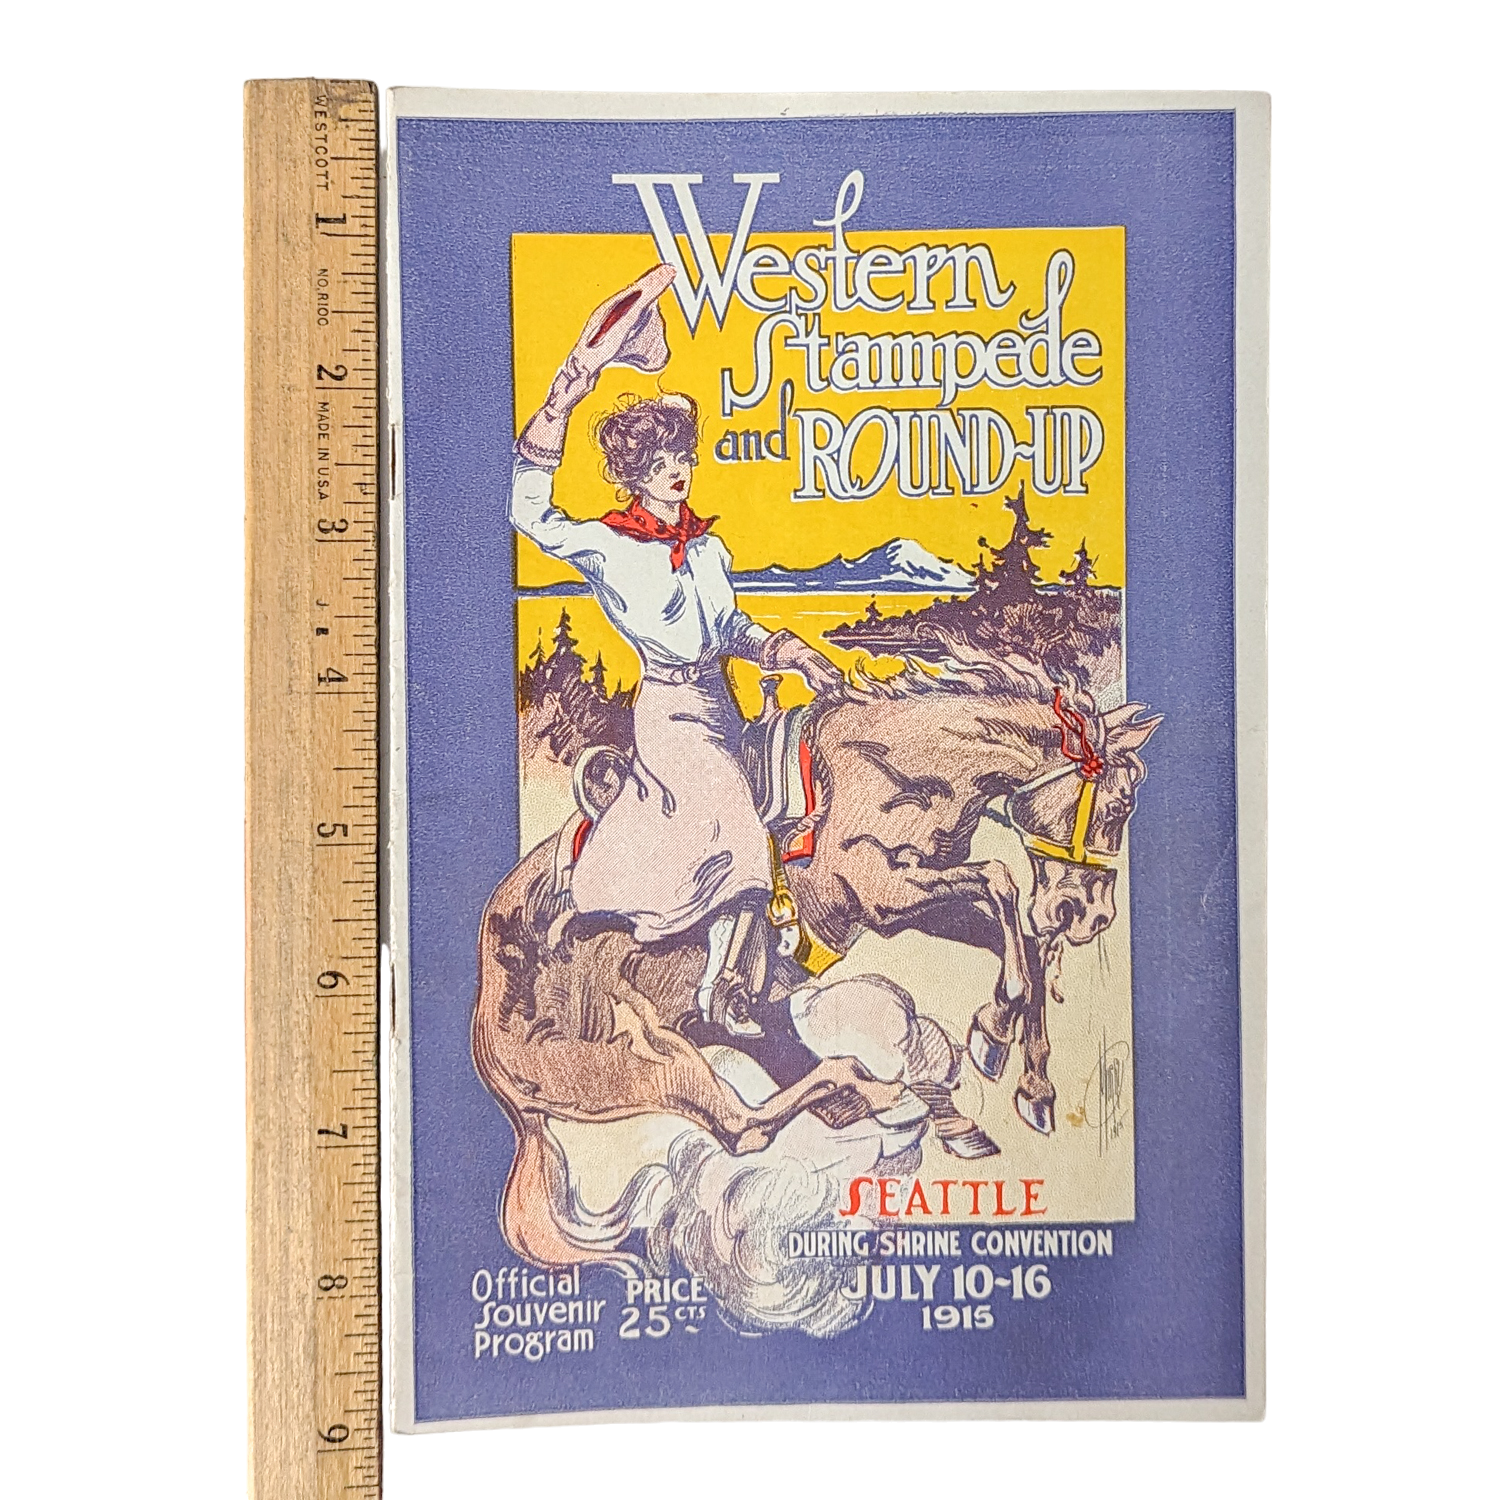 Antique Seattle Rodeo Program from 1915